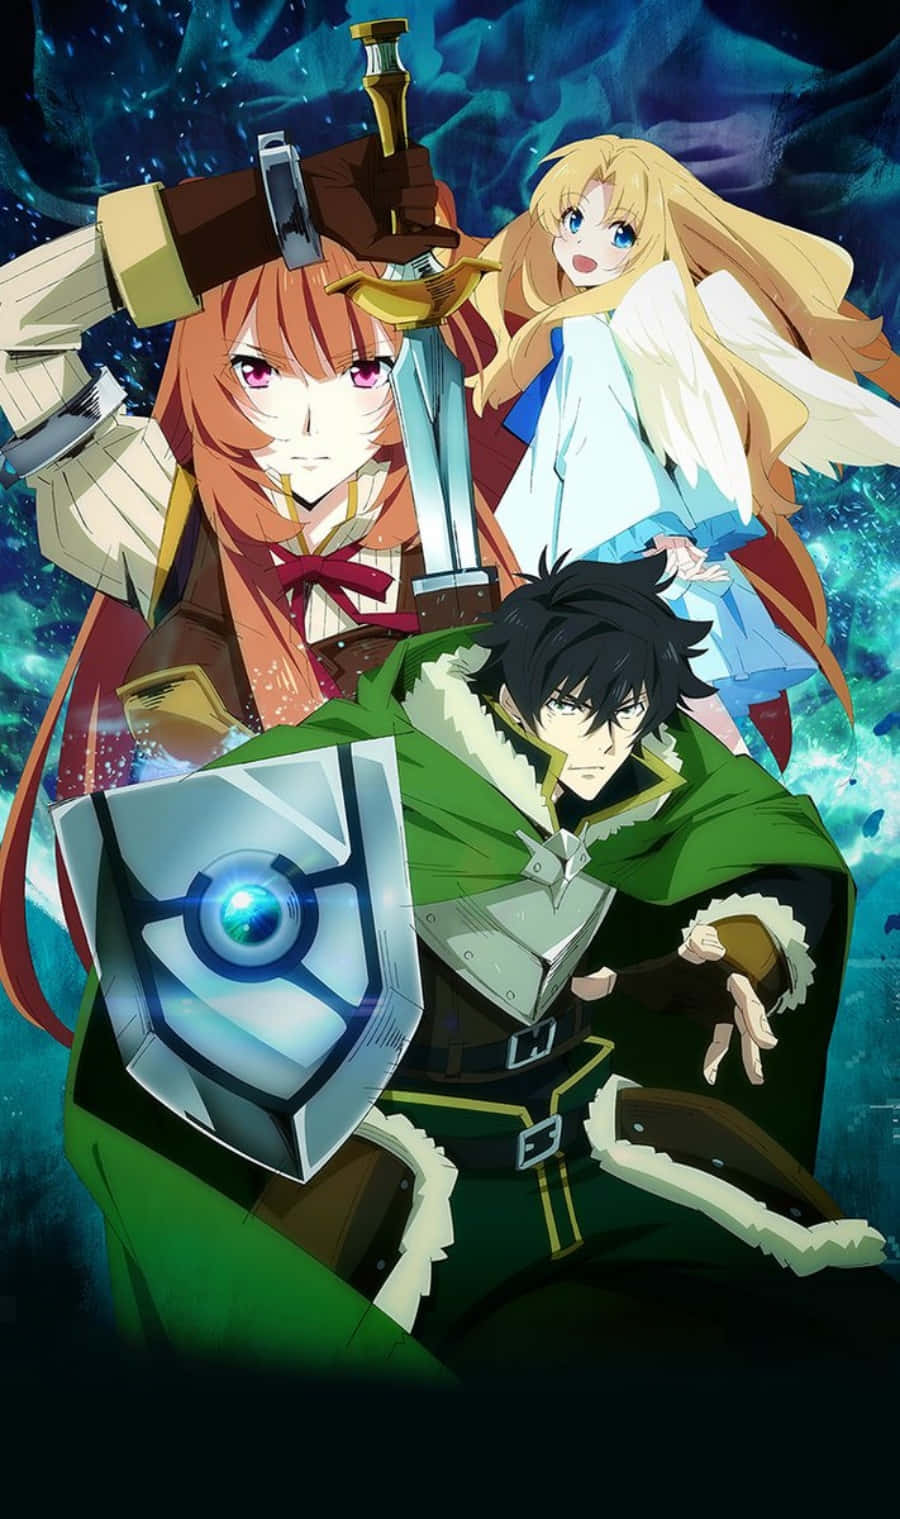 Defend the kingdom with the help of a shield in Shield Hero